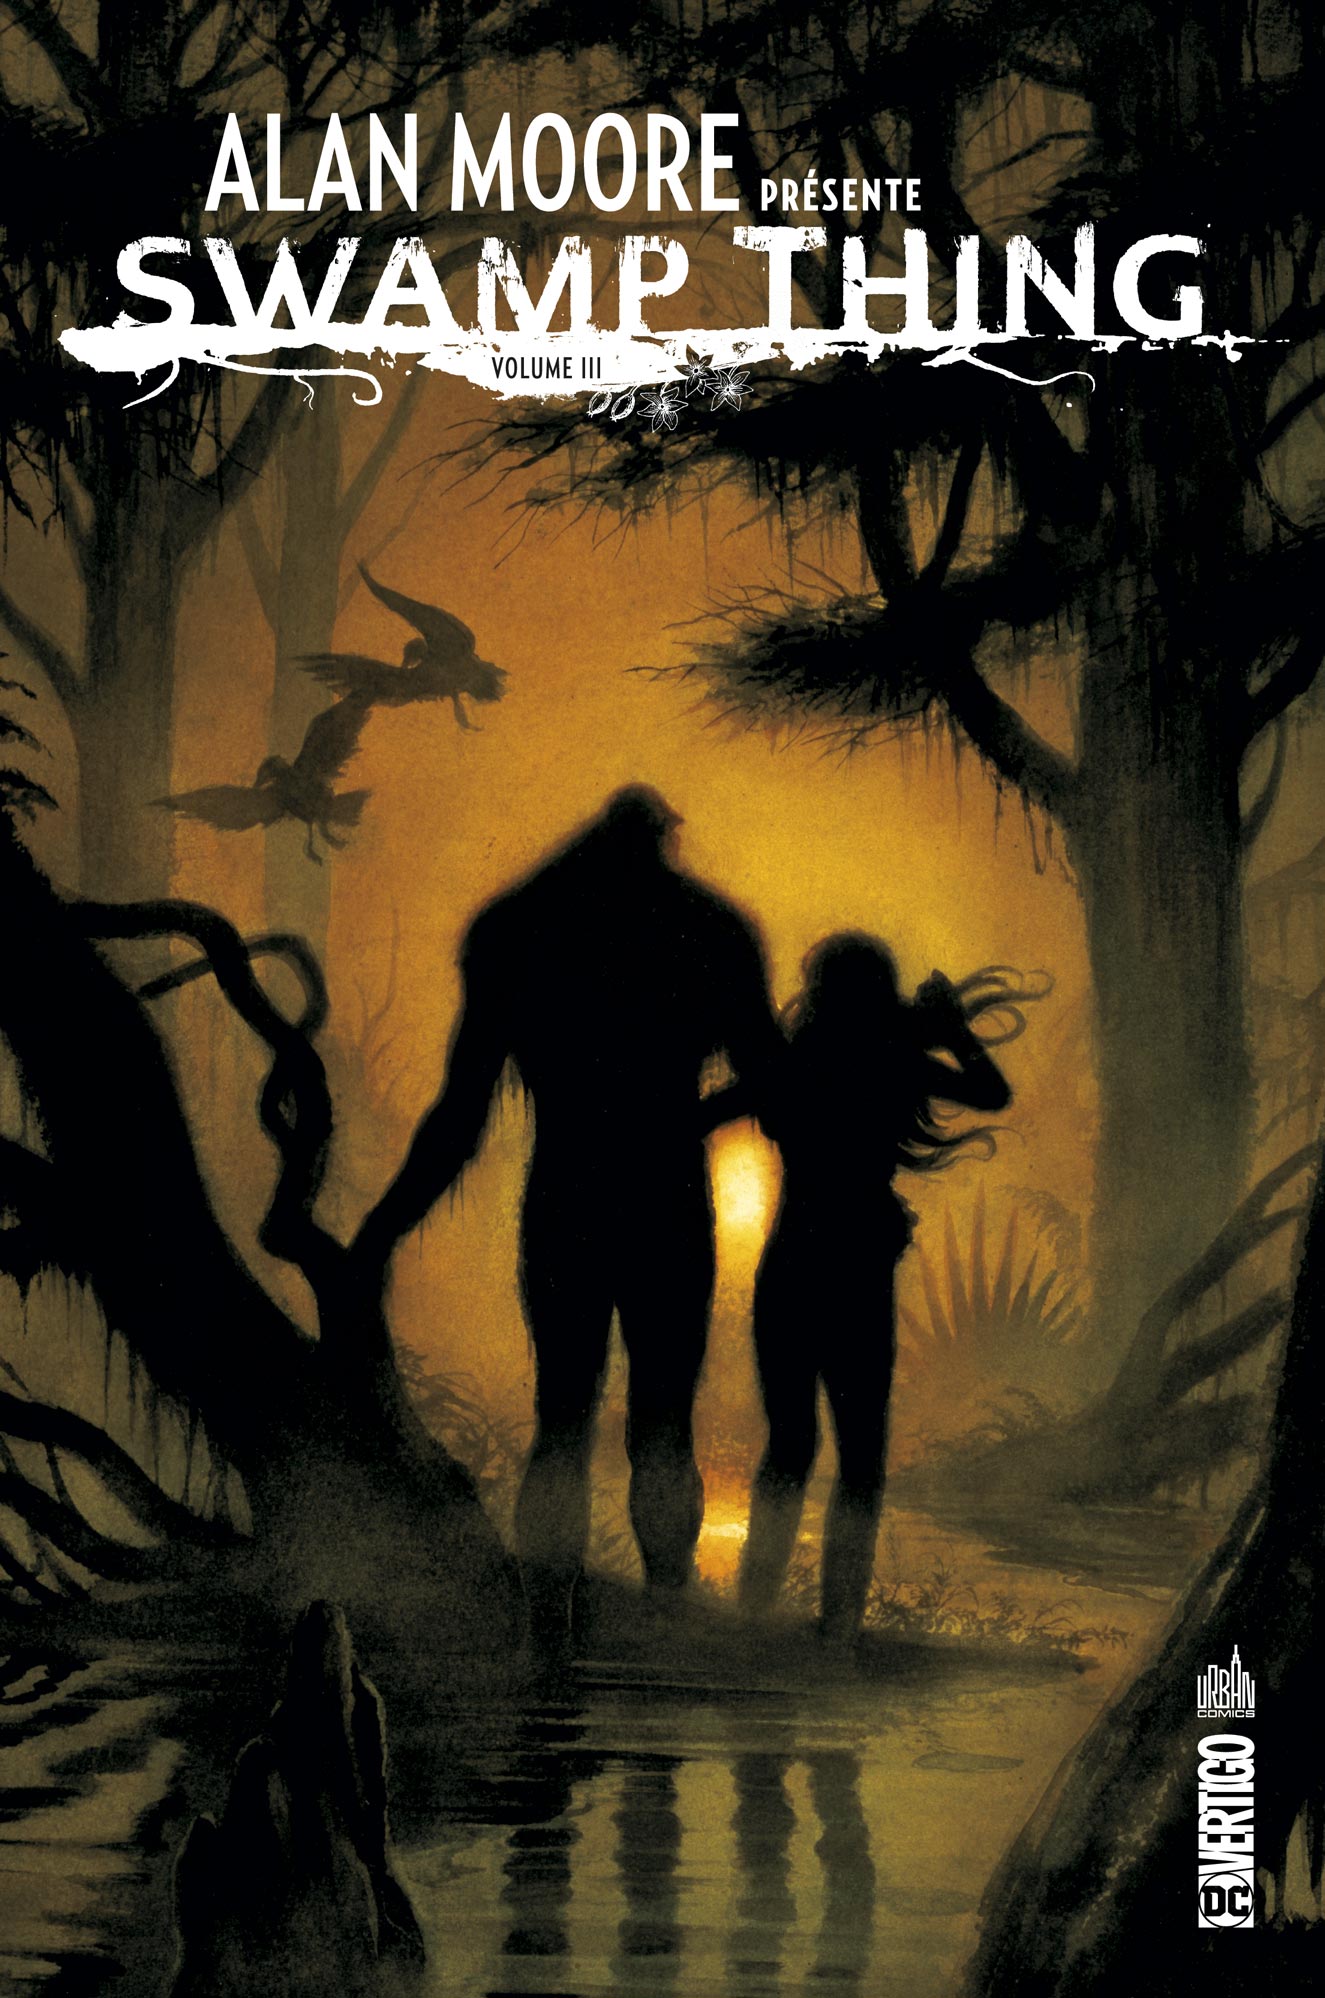 ALAN MOORE PRESENTE SWAMP THING – Tome 3 - couv